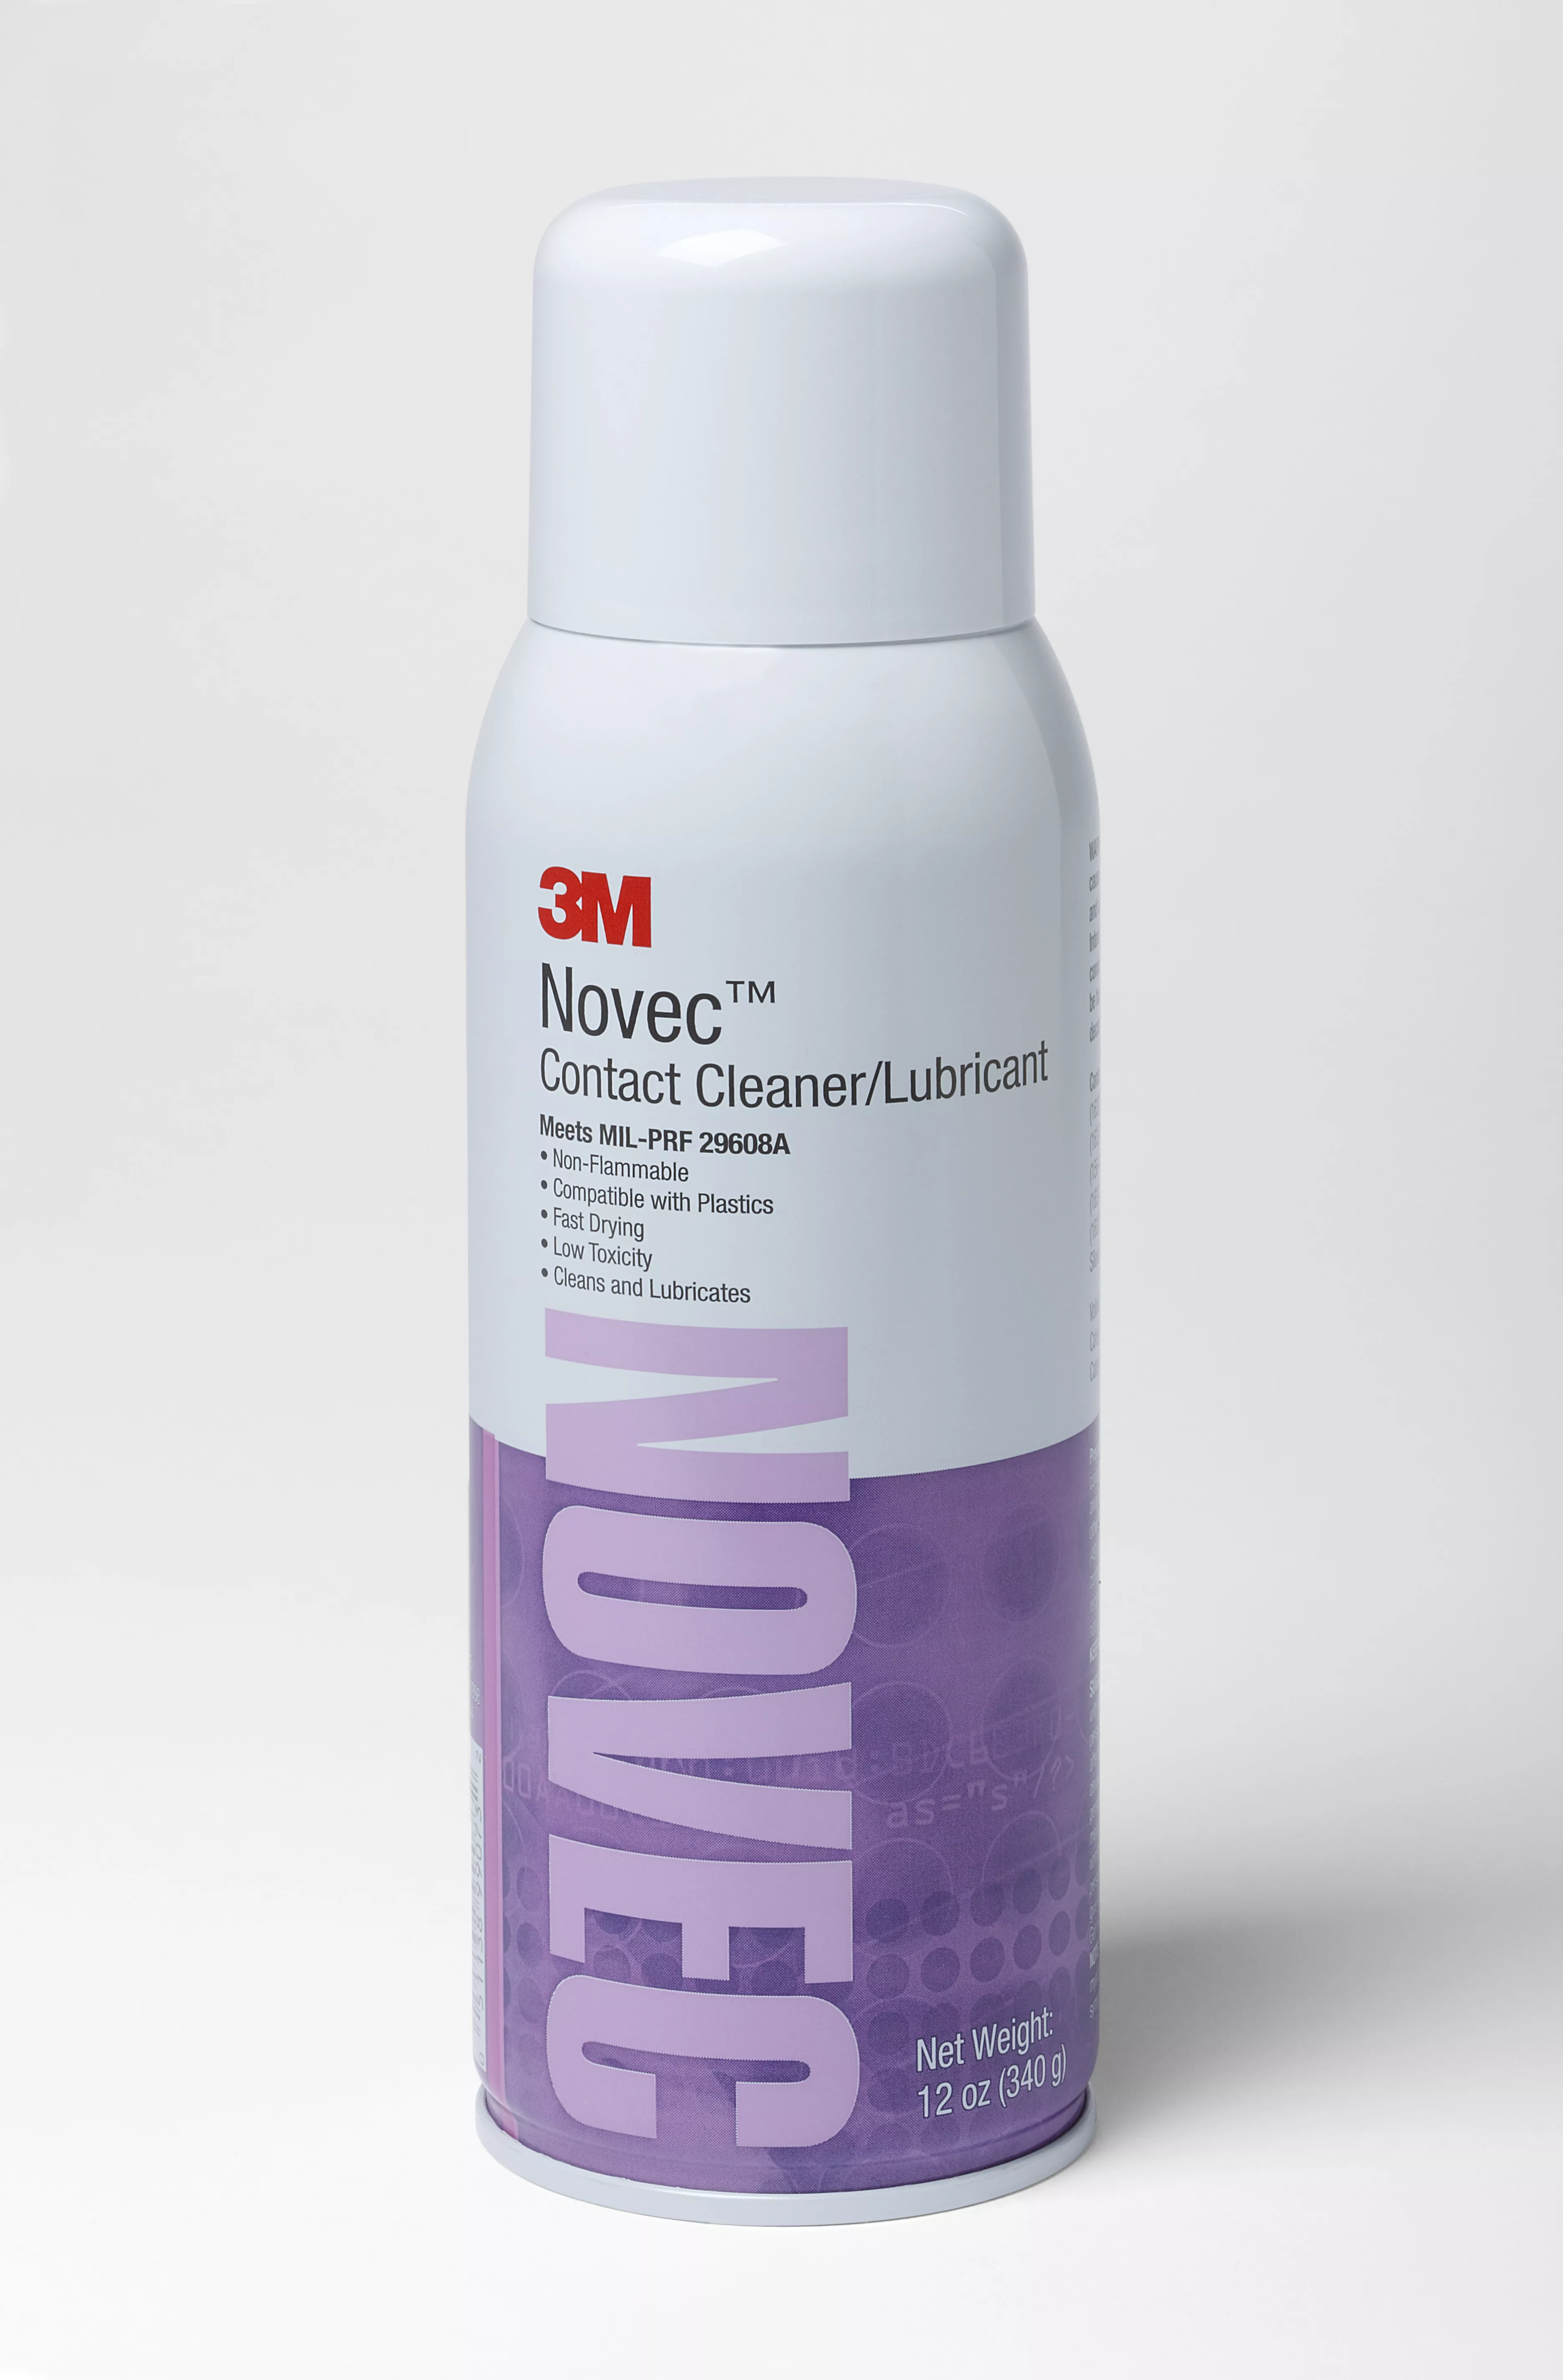 3M™ Novec™ Contact Cleaner/Lubricant, 340 g (12 oz), 6 Canisters/Case